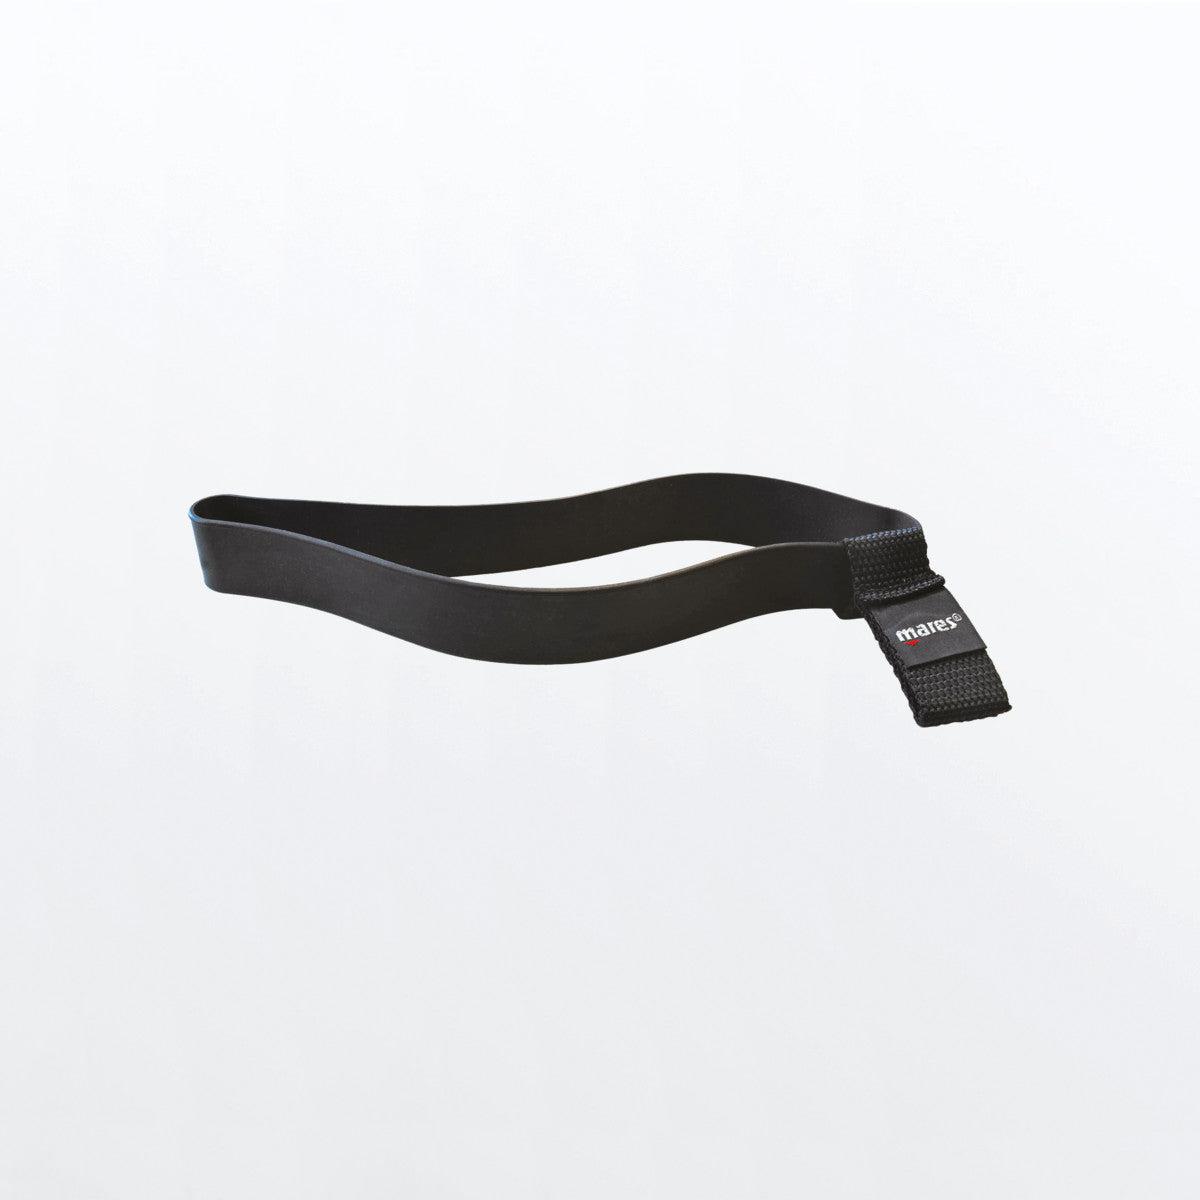 Mares Rubber Stage Tank Strap Accessory Size 7In-